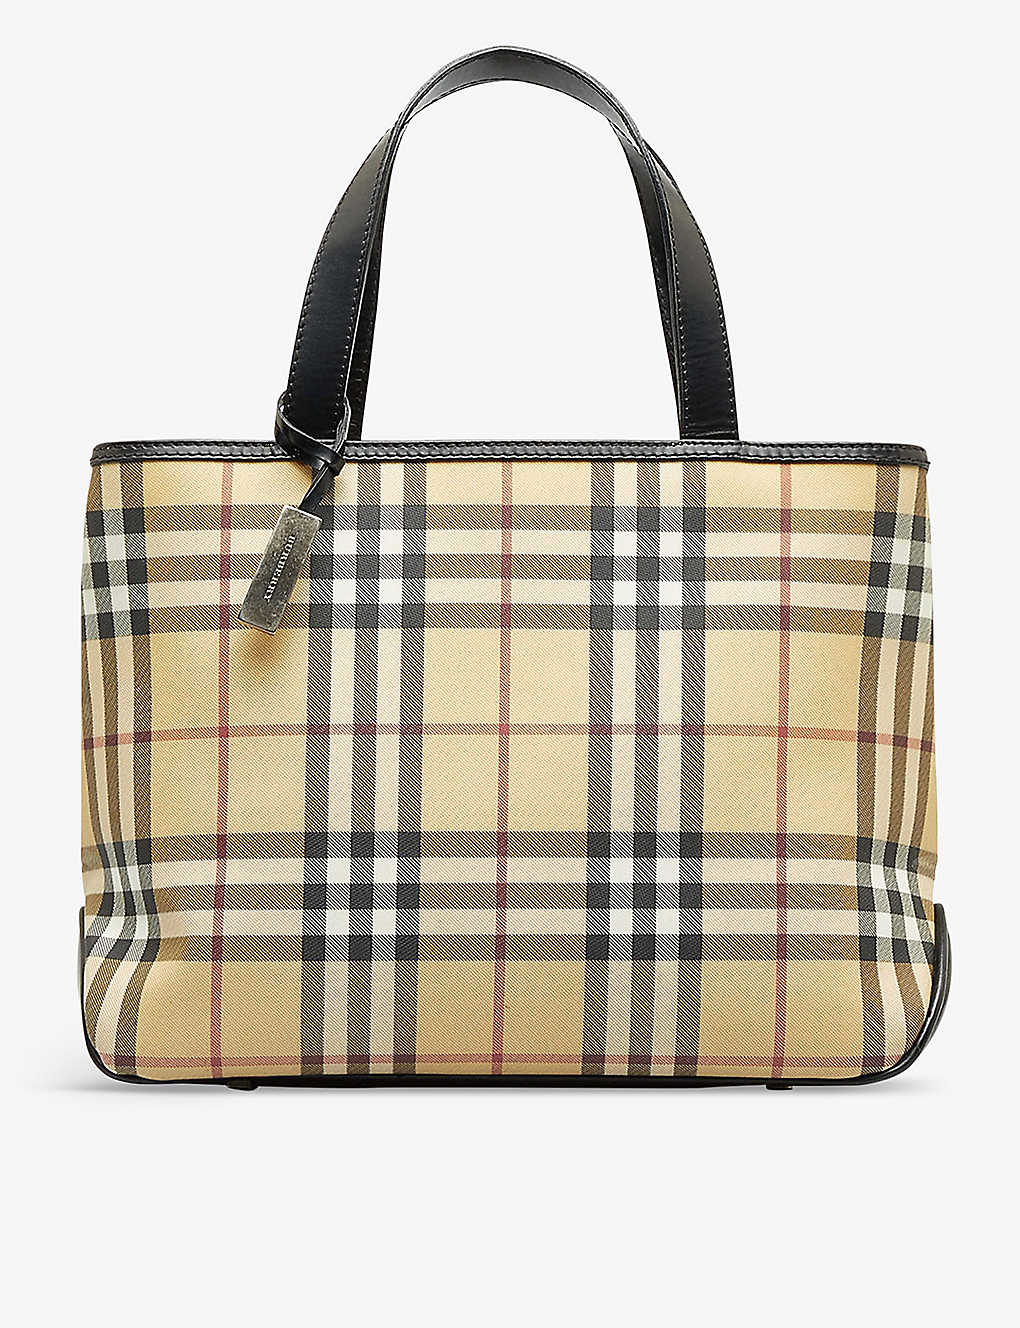 Reselfridges Brown Beige Pre-loved Burberry Checked Canvas And Leather Hand Bag